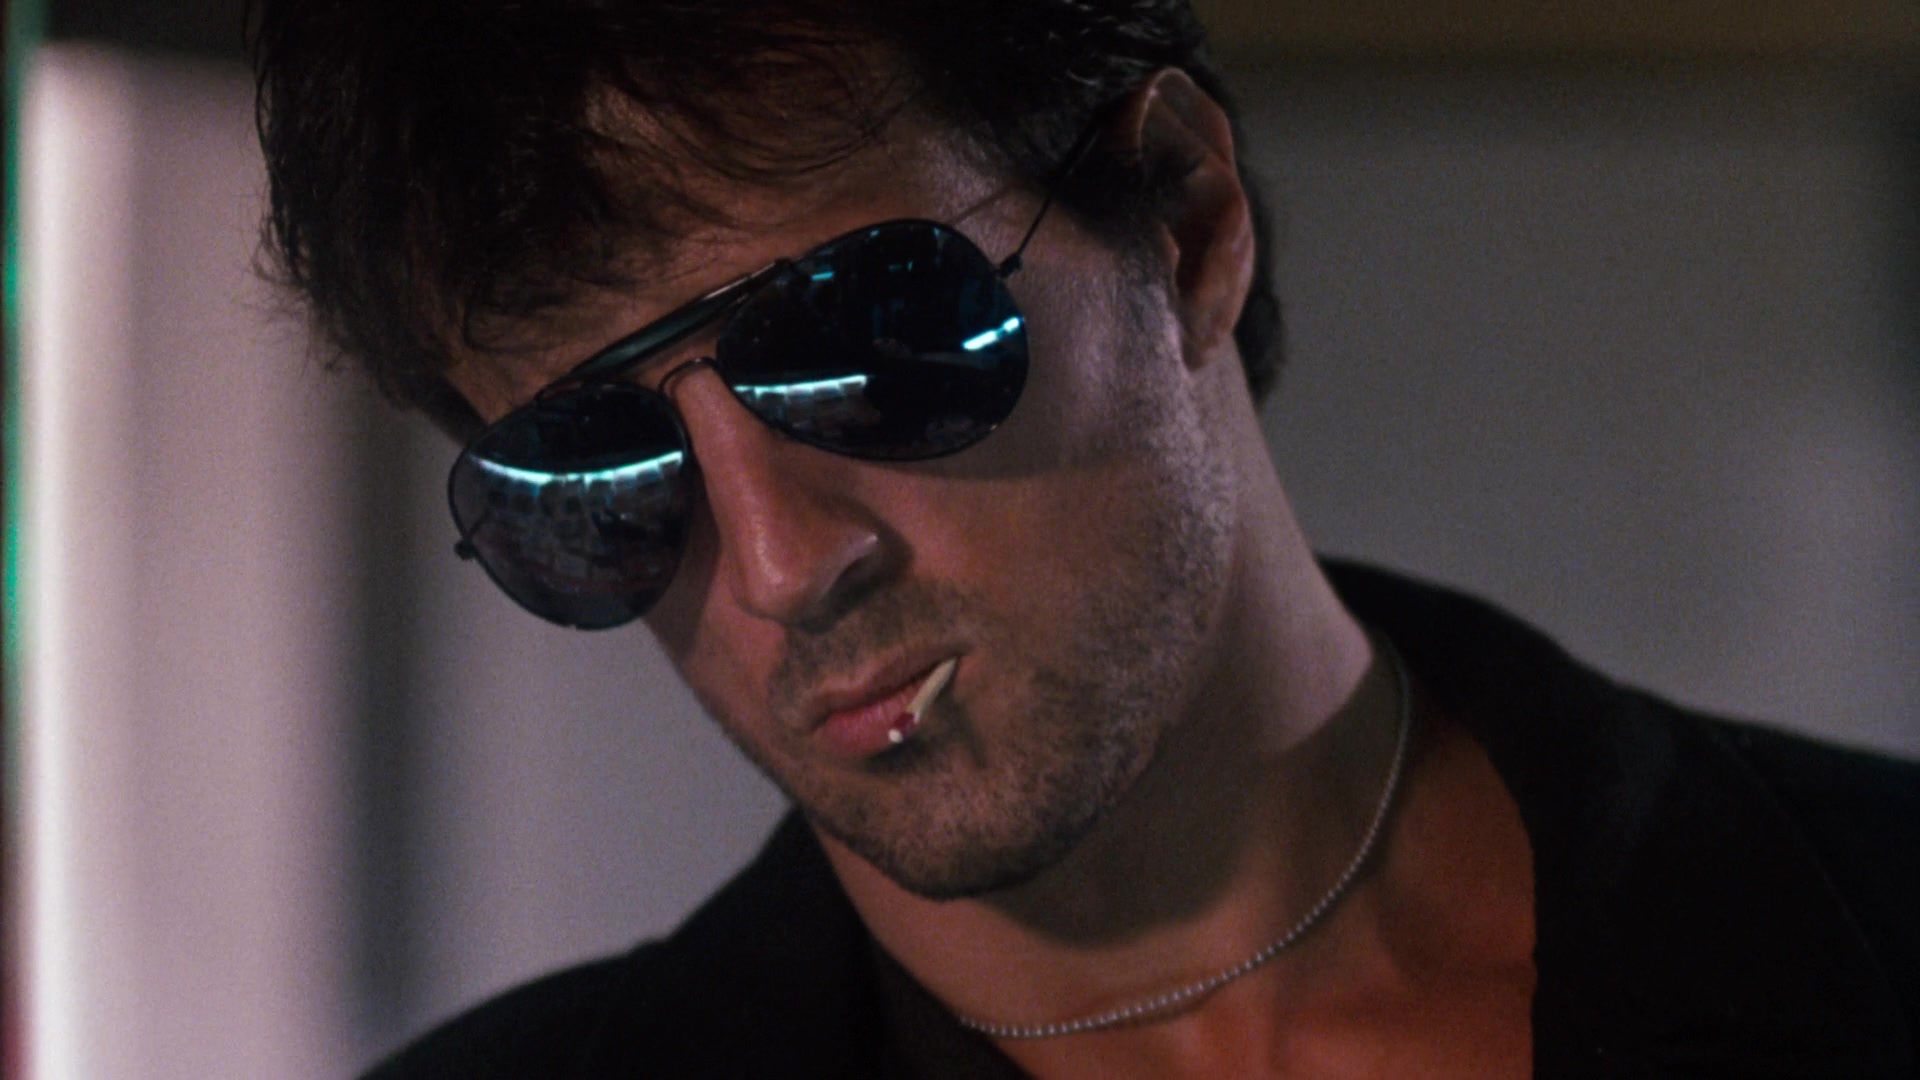 Ray-Ban 3030 Outdoorsman Sunglasses By Sylvester Stallone In (1986)